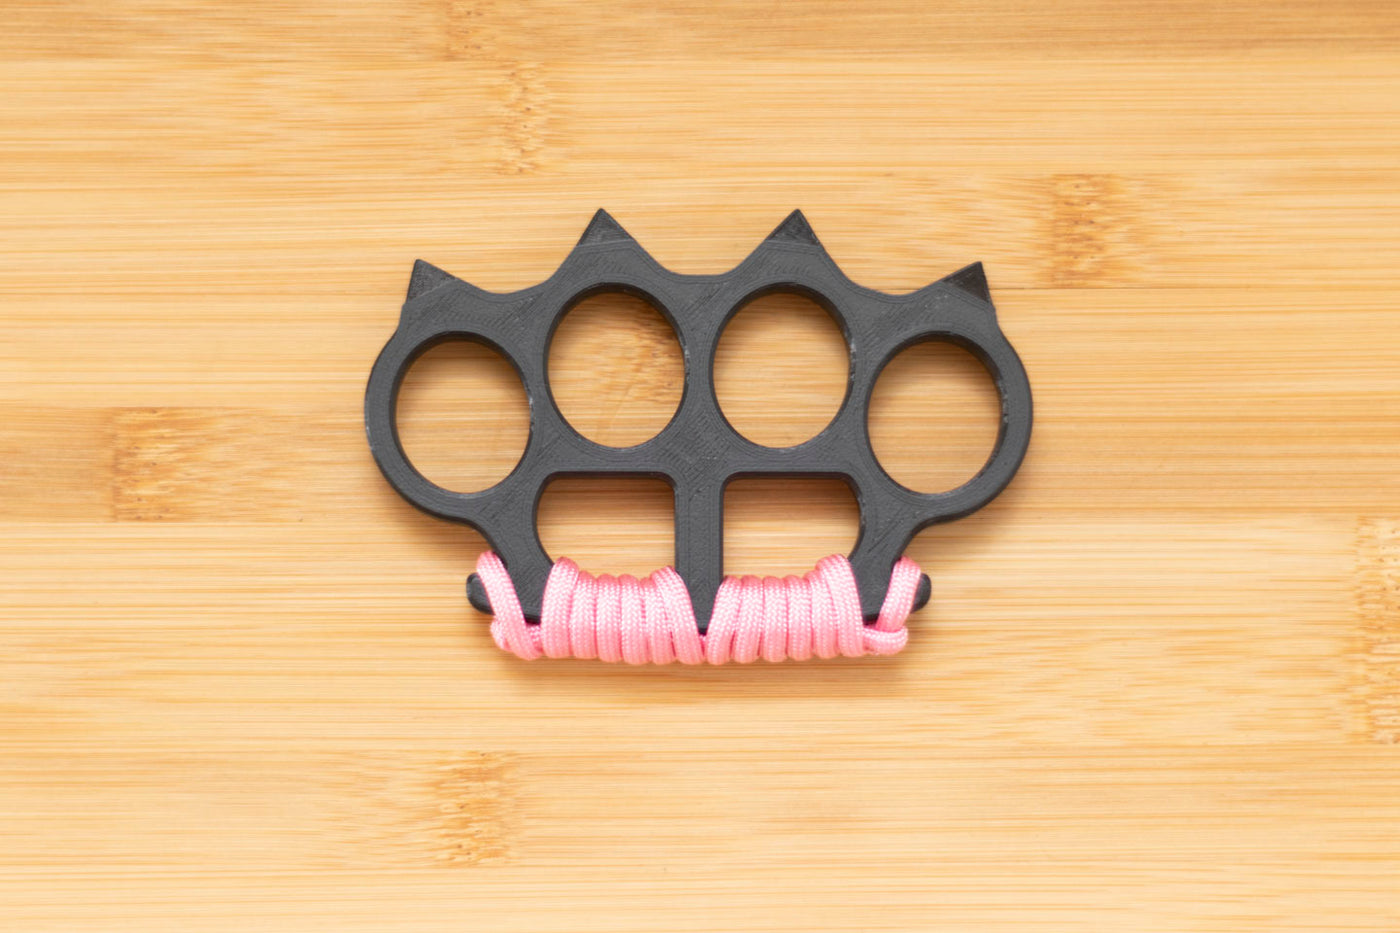 Black Brass Knuckles wrapped in Pink Paracord